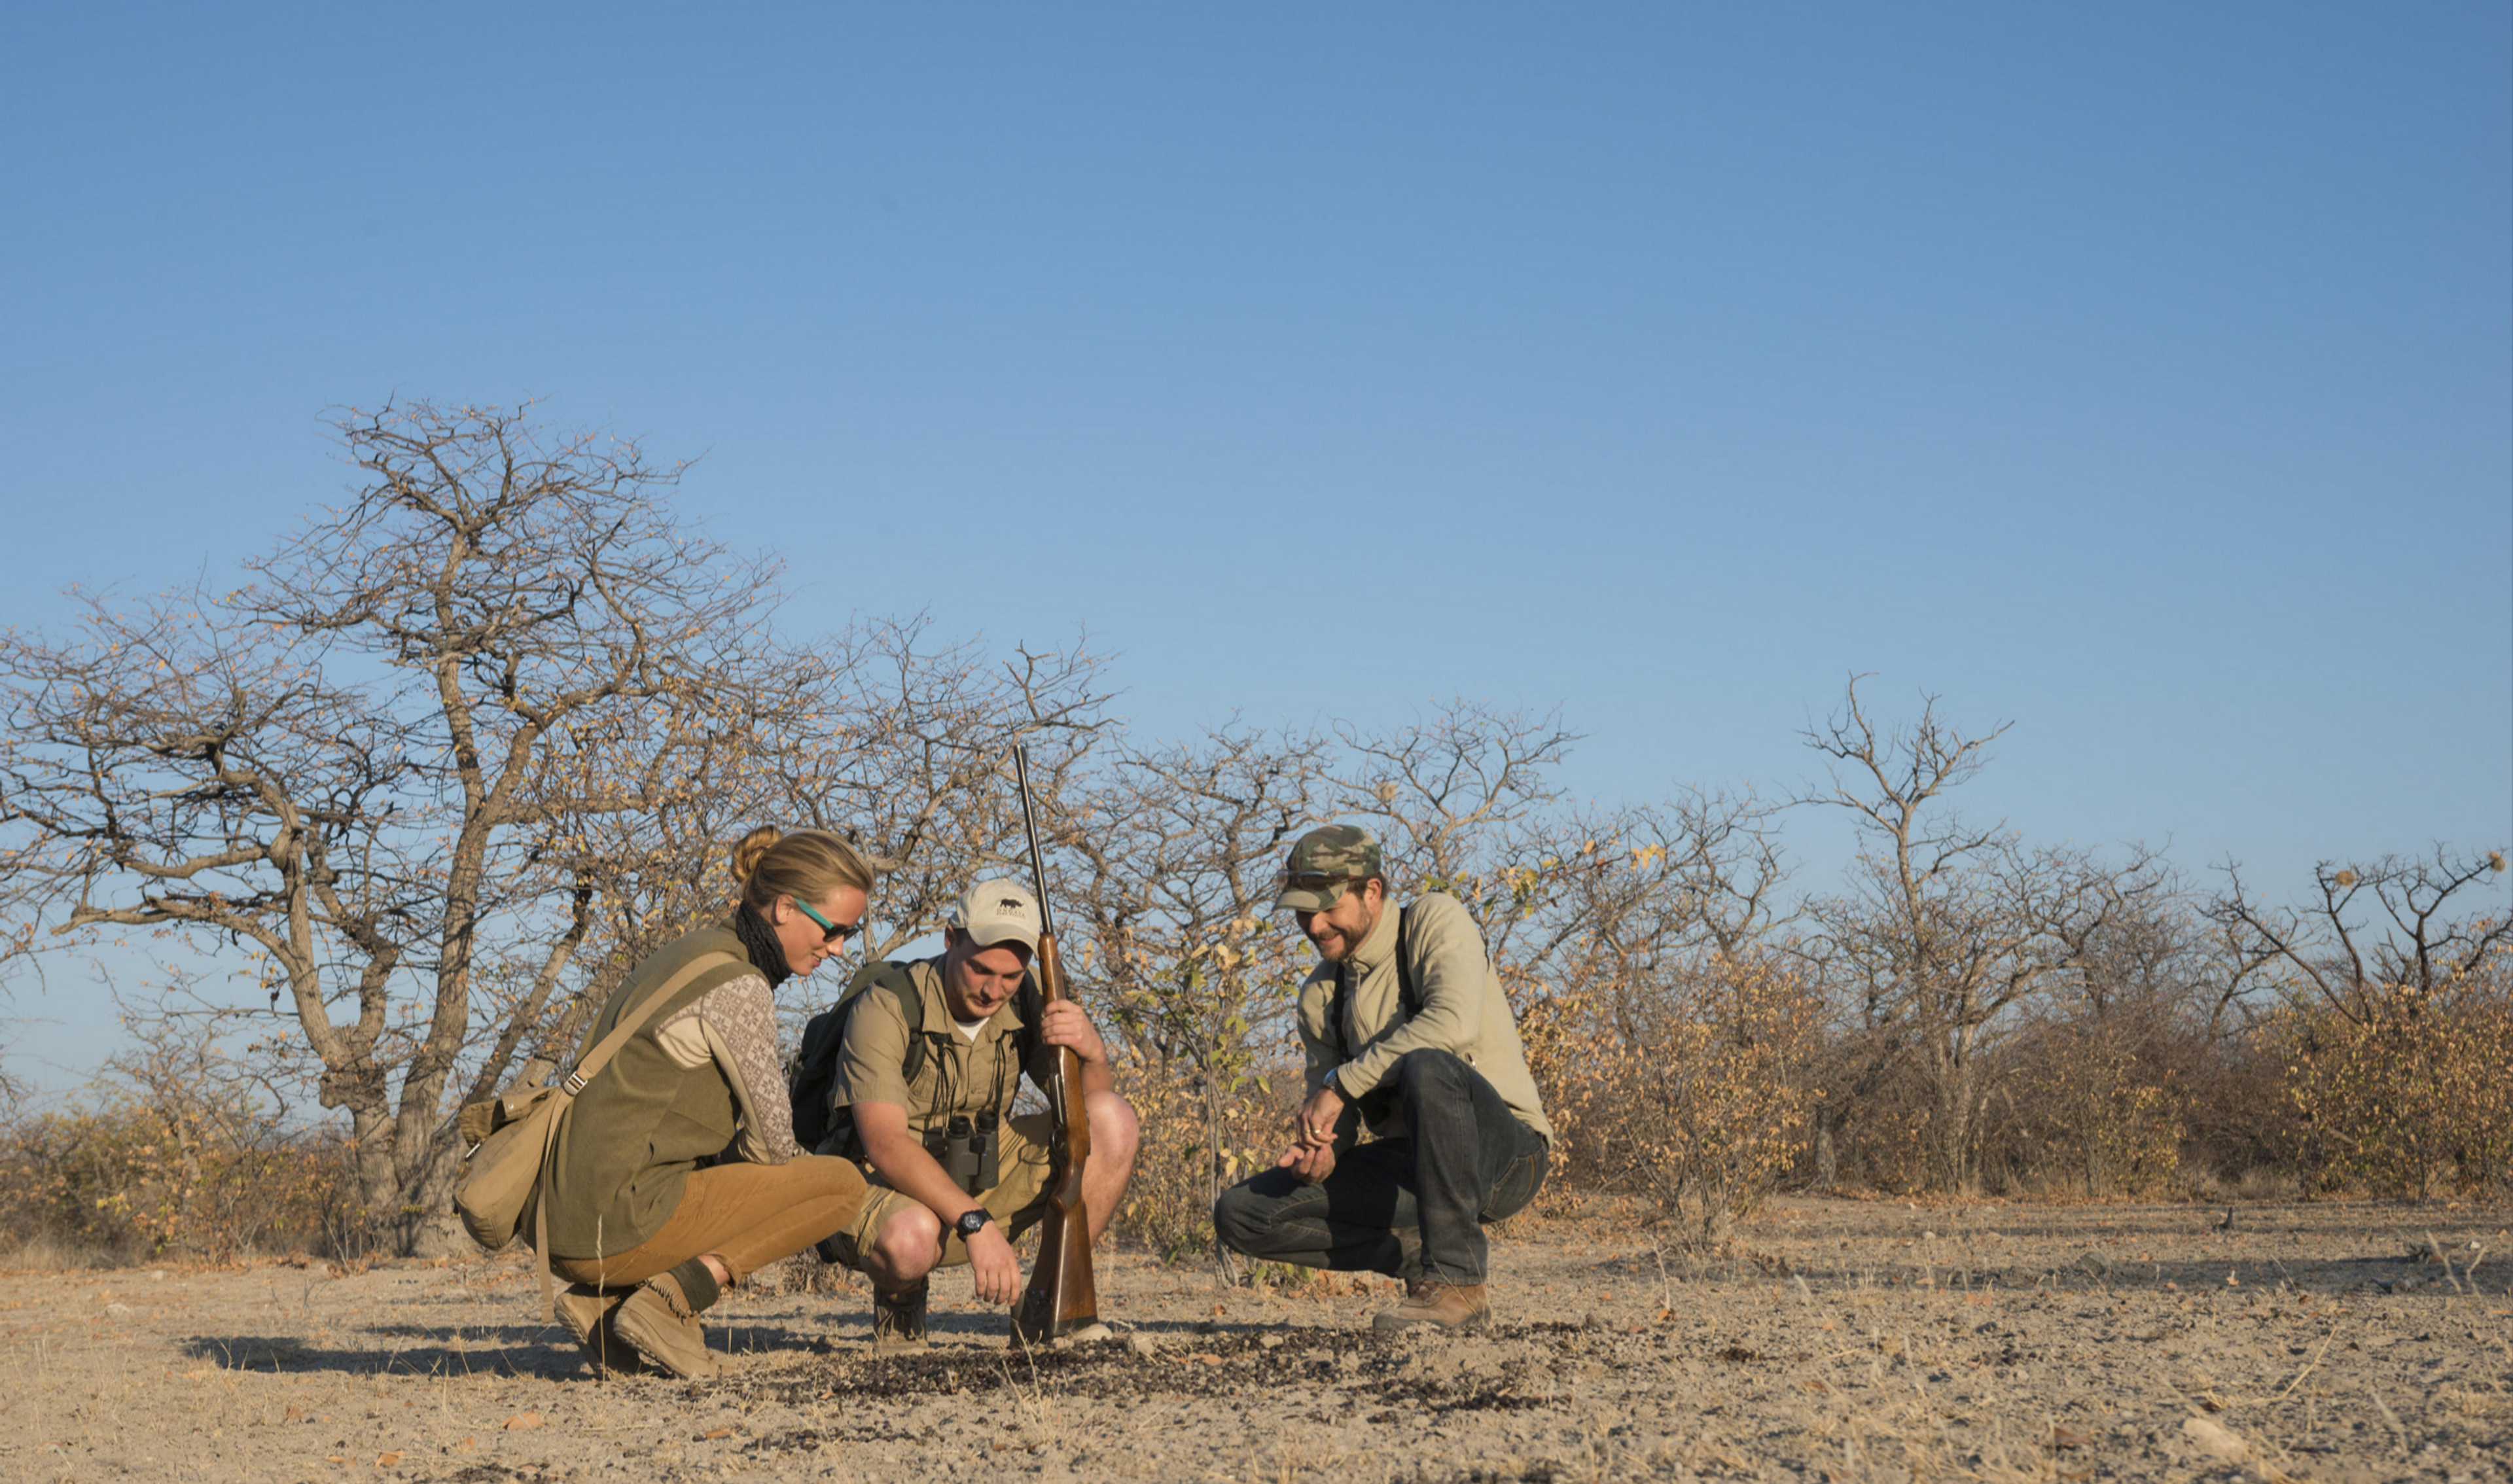 Gathering data to make a difference, researchers from around the world are advancing the cause of conservation at Ongava.